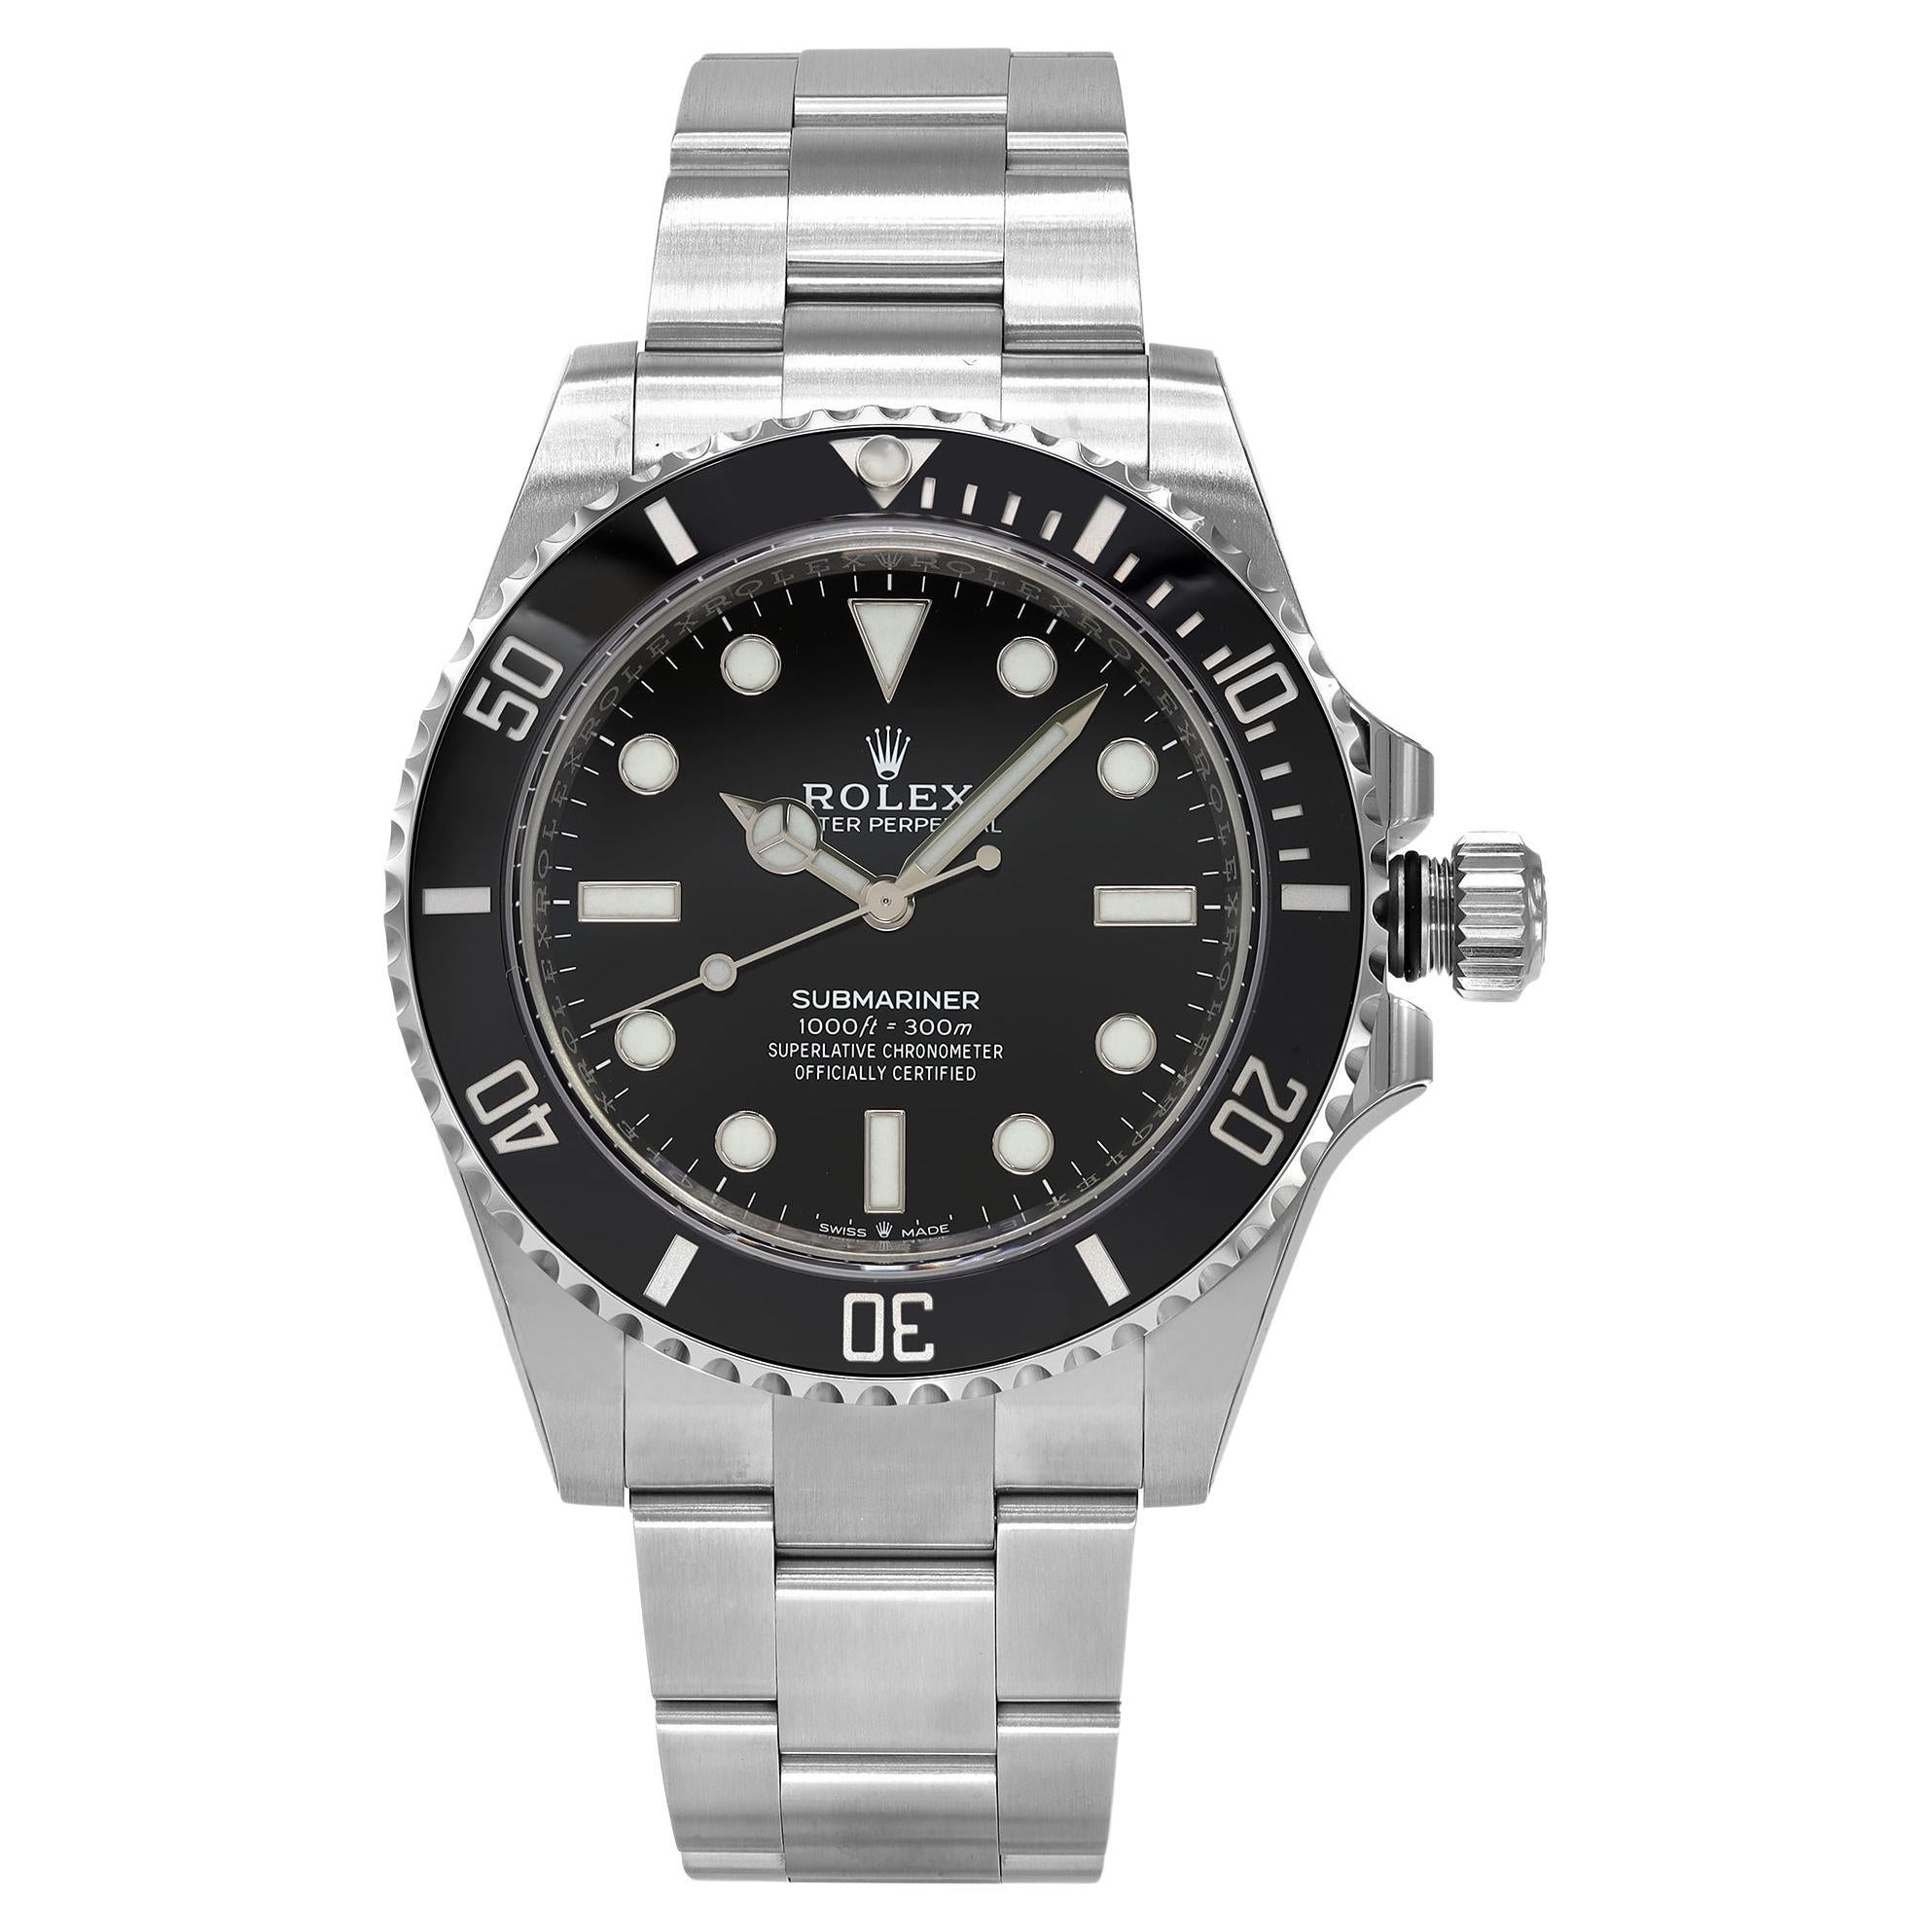 Rolex Submariner 41mm No Date Steel Ceramic Black Dial Automatic Watch 124060